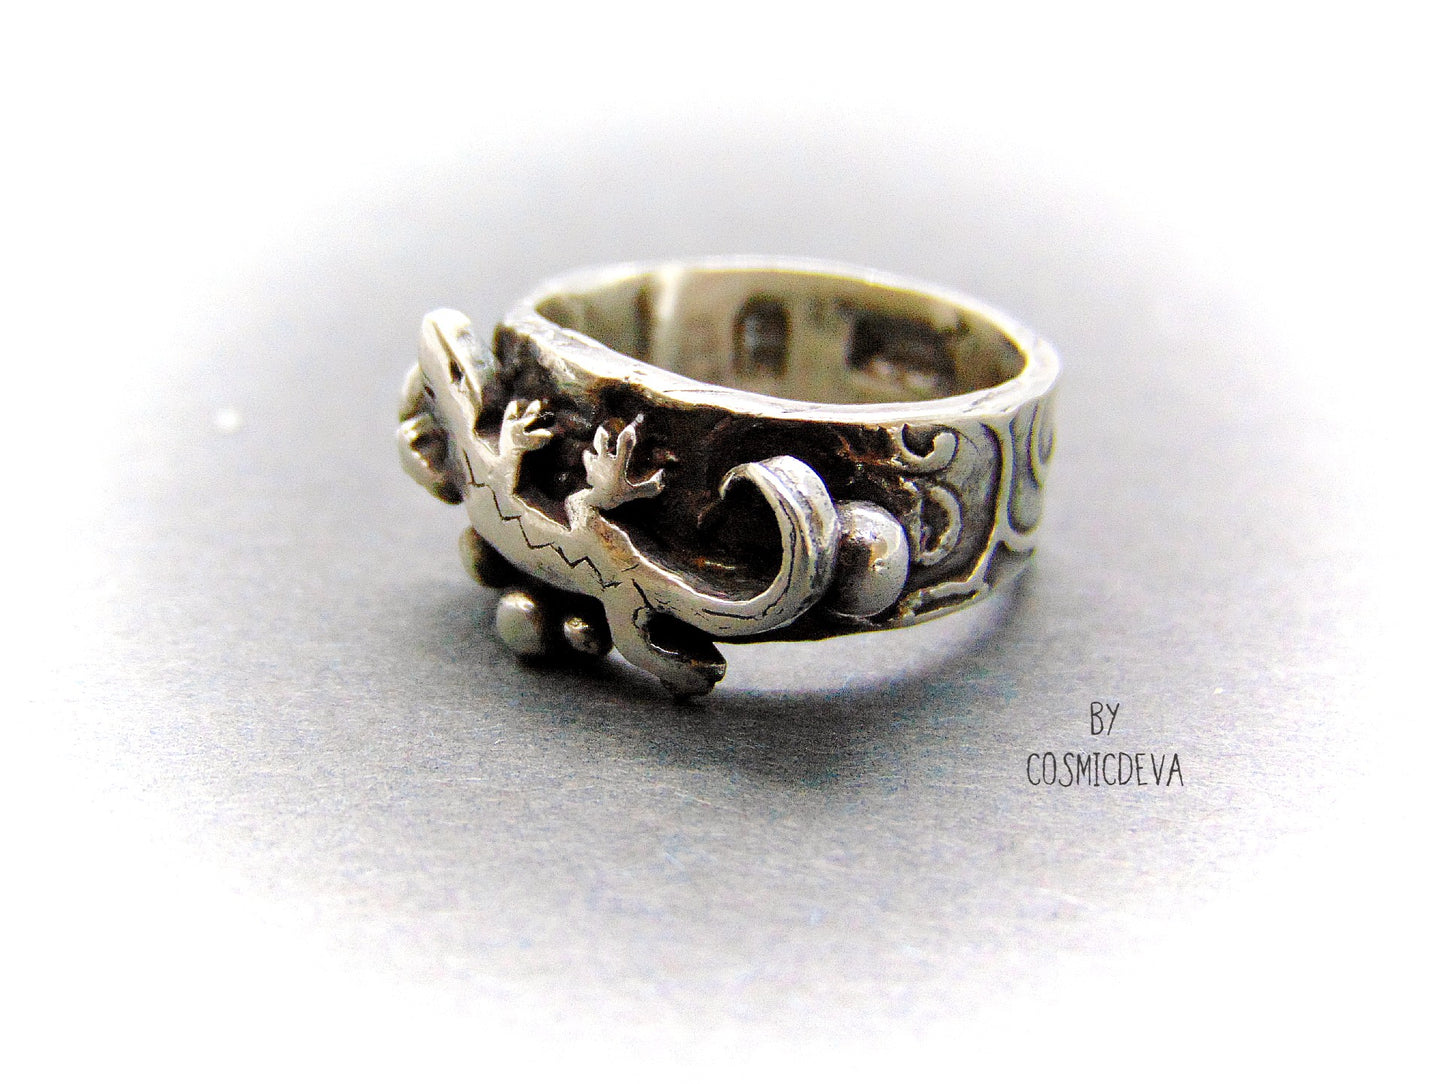 Lizard Gecko Sterling Silver Ring, Reptile Jewelry, US Size 6 Ring. Hand-crafted cute lizard gecko reptile ring made of pure solid 950 sterling silver and hallmarked as it. This ring is made from 100% recycled silver and it is 100% Eco-friendly! - CosmicDeva